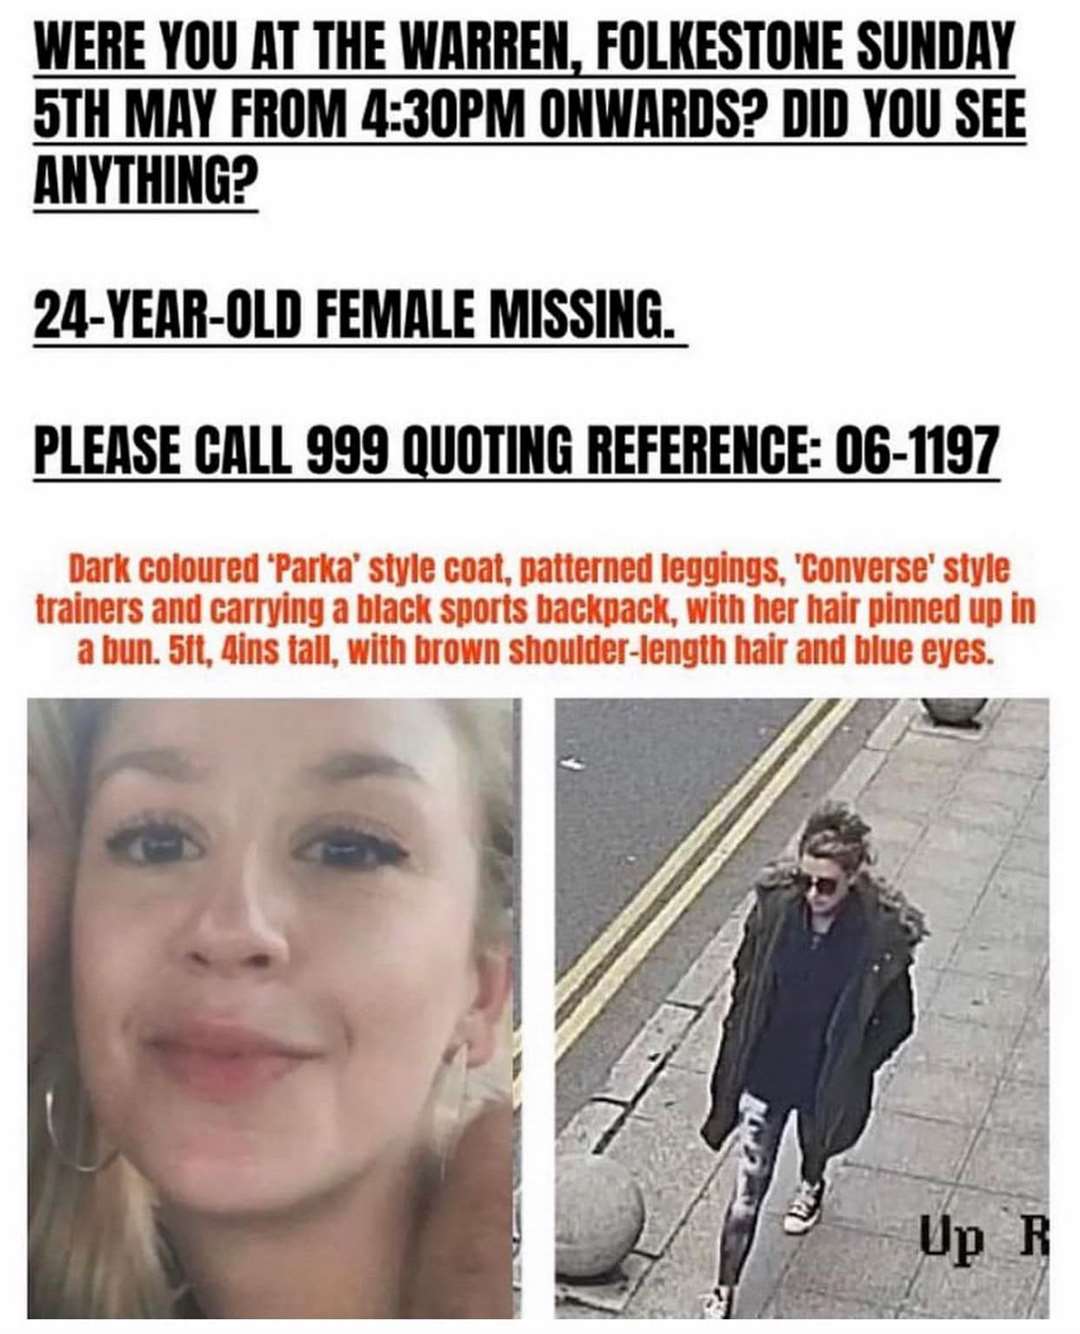 A poster appealing for help to find Leah Daley, who went missing on May 5